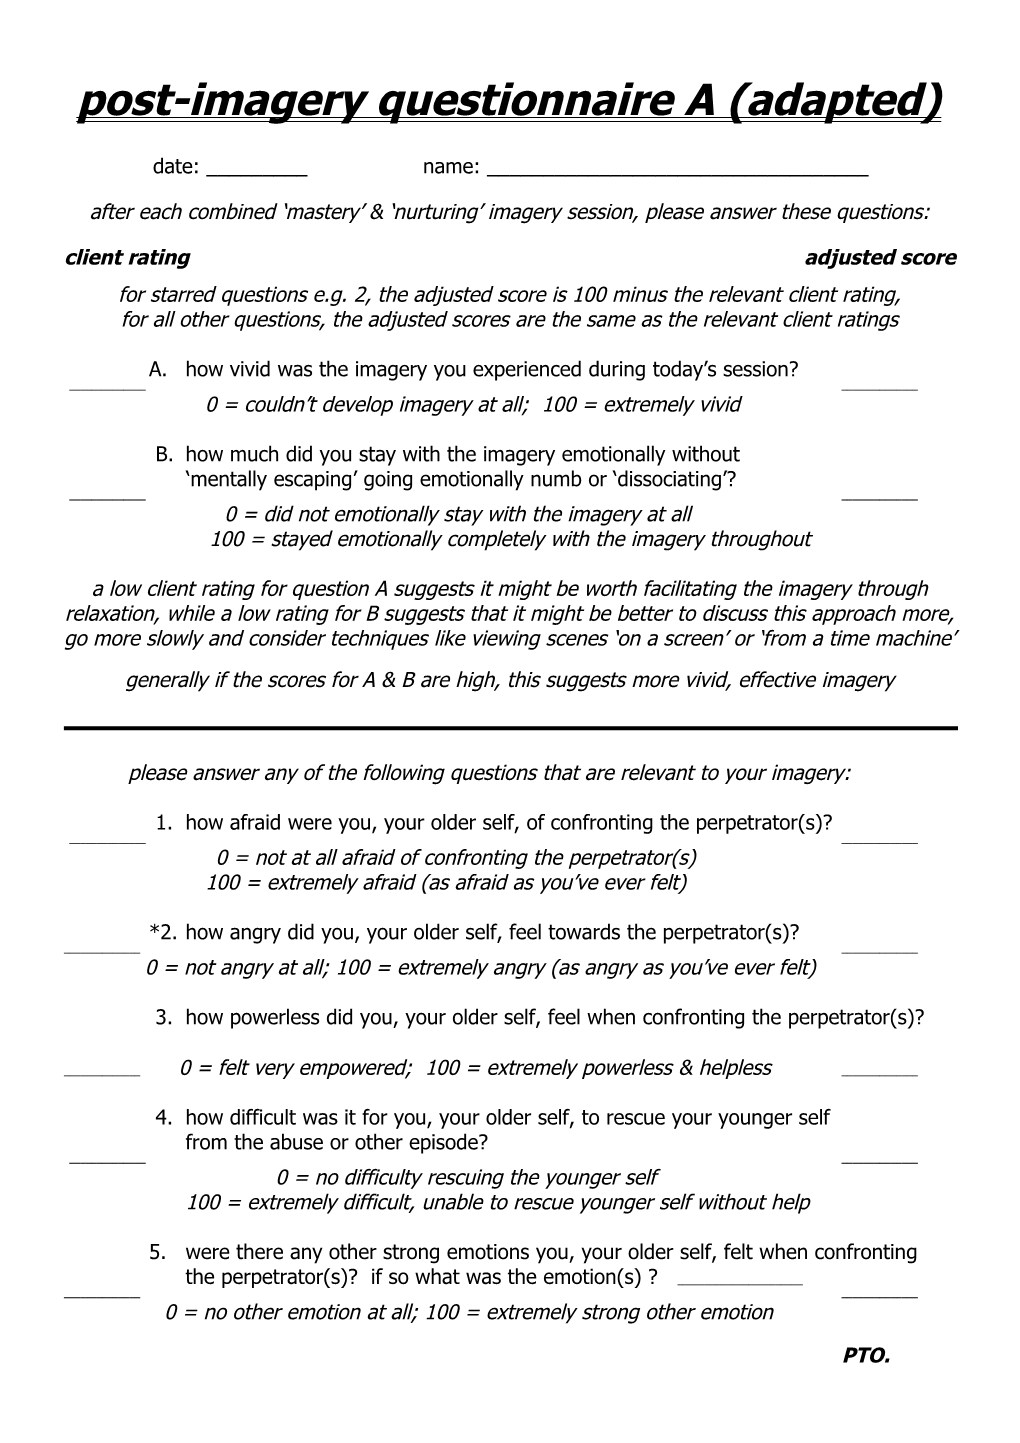 Post-Imagery Questionnaire a (Adapted)